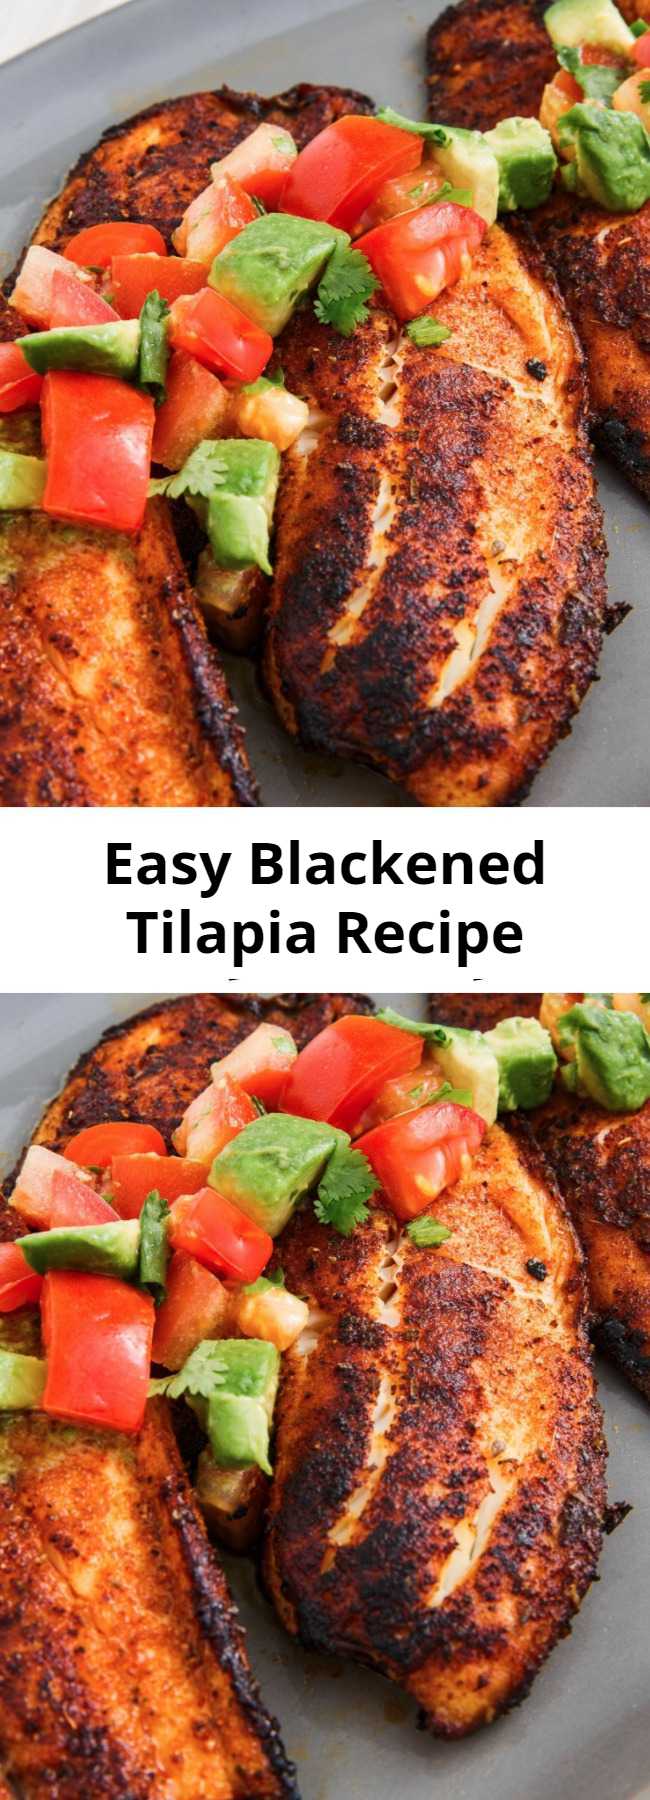 Easy Blackened Tilapia Recipe - Jazz up your fish routine with this super-easy recipe for Blackened Tilapia with Avocado Salsa.